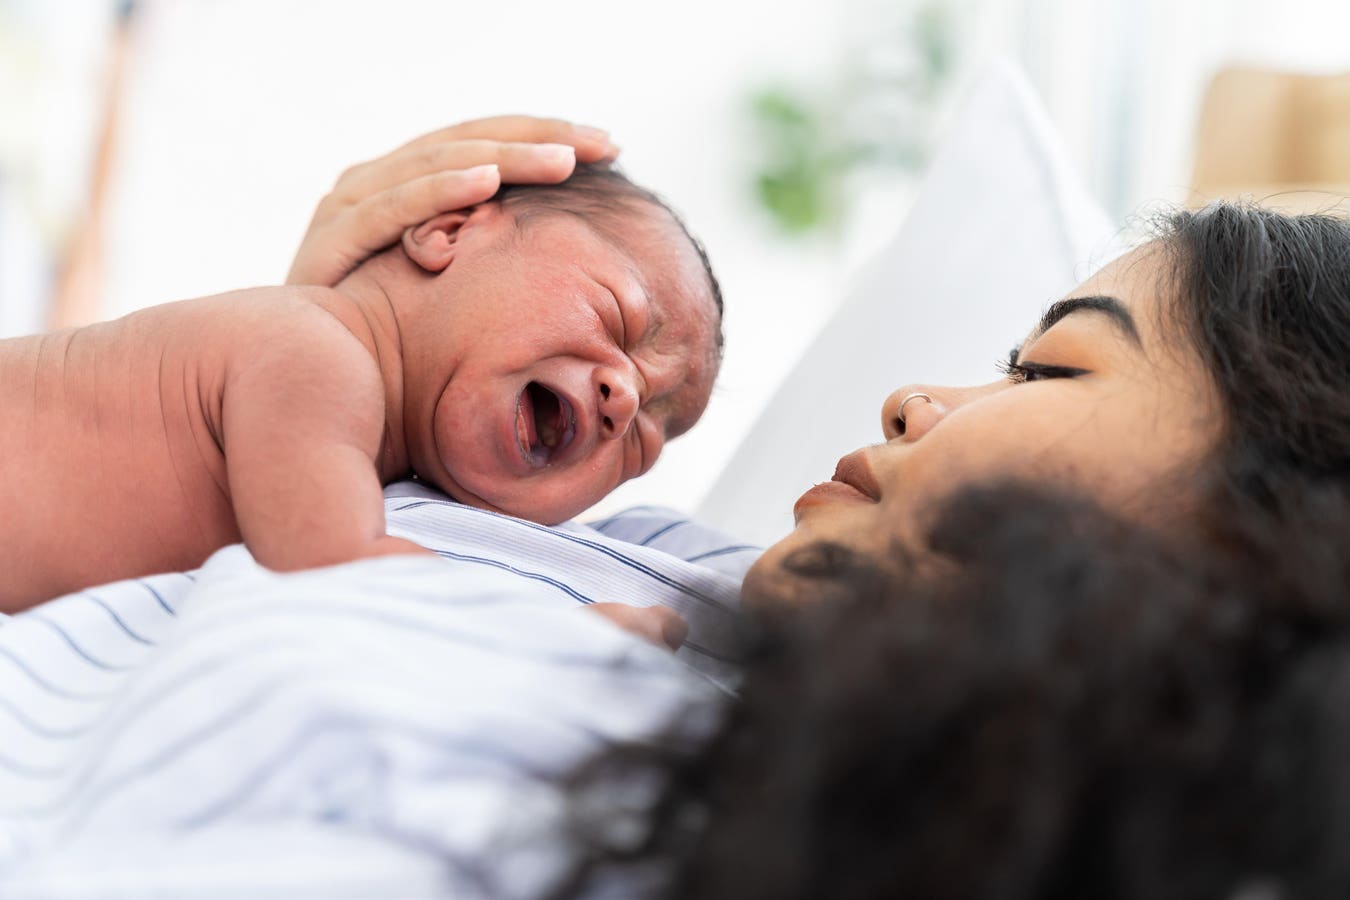 Health body 'deeply concerned' about racism in English maternity wards